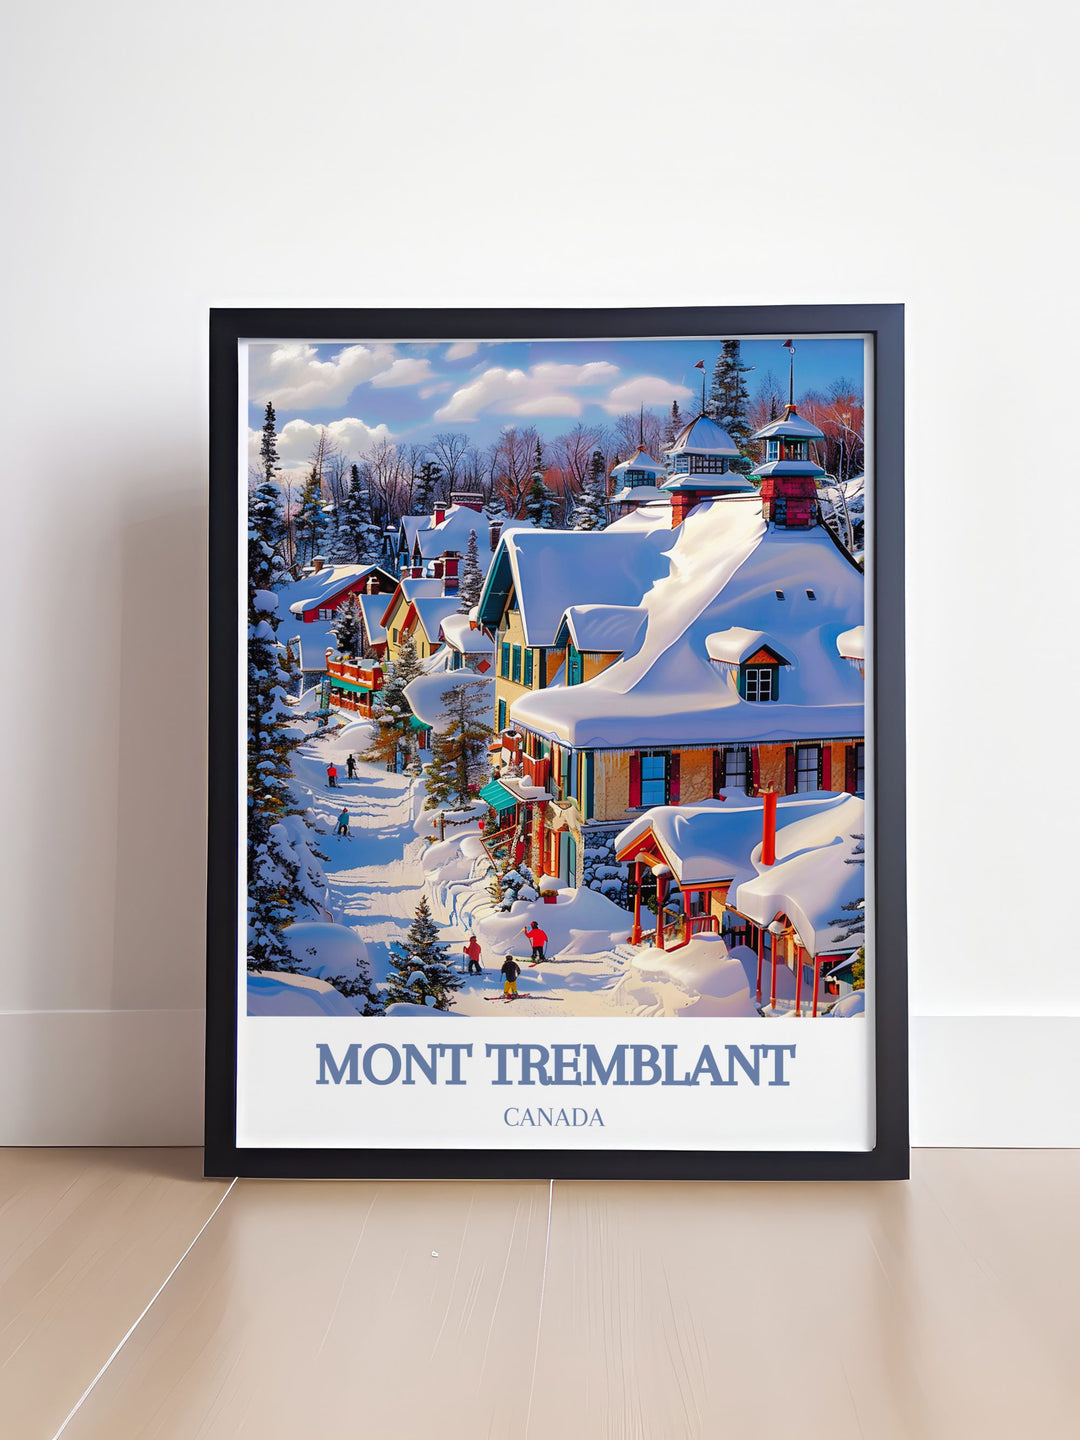 Bucket List Print featuring Tremblant Ski Resort and the Laurentian Mountains an exquisite piece of wall art capturing the serene snow covered slopes and majestic peaks perfect for nature enthusiasts and adventure seekers looking to enhance their space.